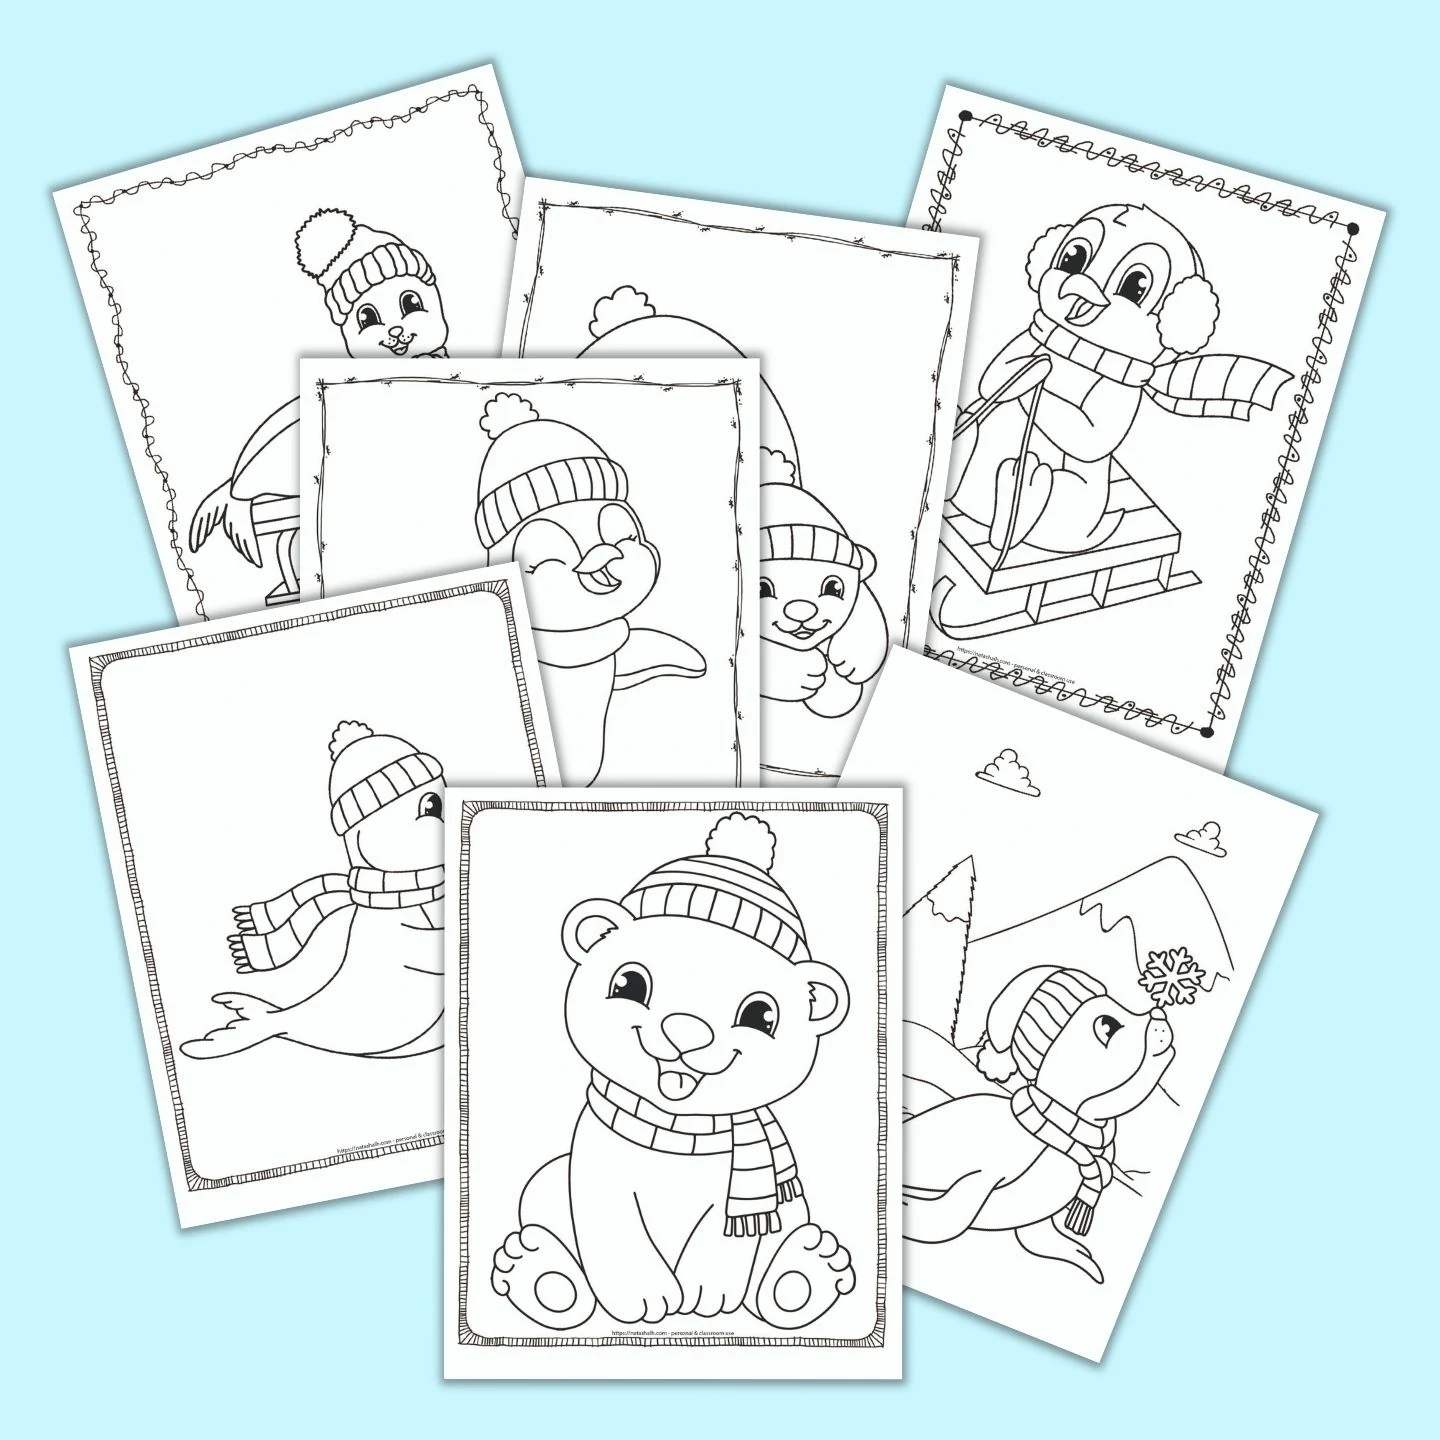 20+ FREE Inspirational Coloring Pages for when you're having a ...